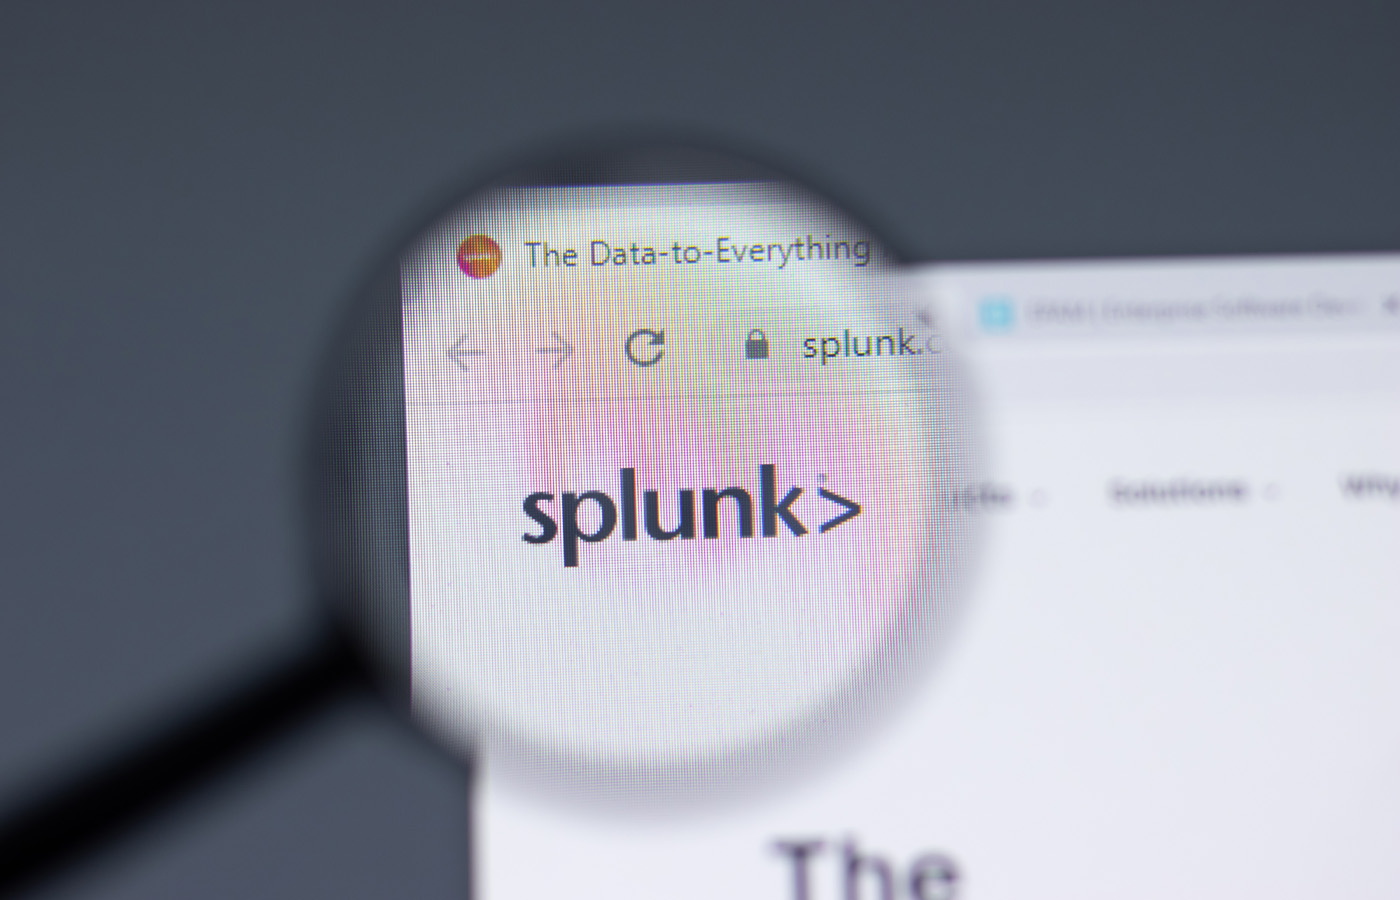 Cisco to Acquire Splunk for $28 Billion, Accelerating AI-Enabled Security and Observability – Source: www.techrepublic.com